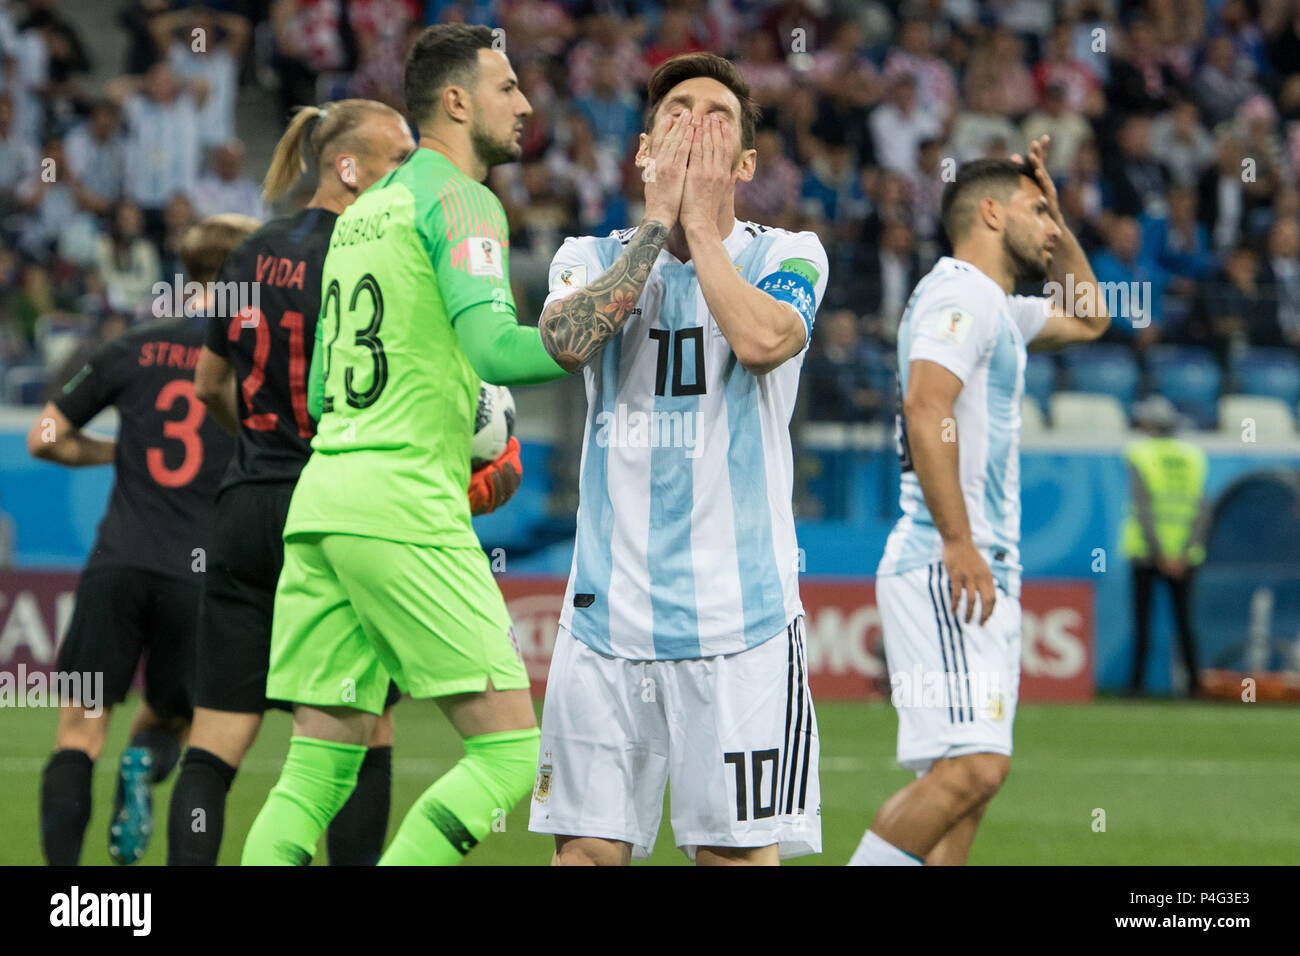 Moscow, Russia. 21st June, 2018. Nizhny Novgorod, Russland. 21st June, 2018. Lionel MESSI (mi., ARG) holds the hands over his face after a missed goal hace, frustrated, frustrated, frustratedet, disappointed, showered, decapitation, disappointment, sad, half figure, half figure, gesture, gesture, Argentina (ARG) - Croatia (CRO), preliminary round, Group D, match 23, on 21.06.2018 in Moscow; Football World Cup 2018 in Russia from 14.06. - 15.07.2018. | usage worldwide Credit: dpa/Alamy Live News Credit: dpa picture alliance/Alamy Live News Stock Photo